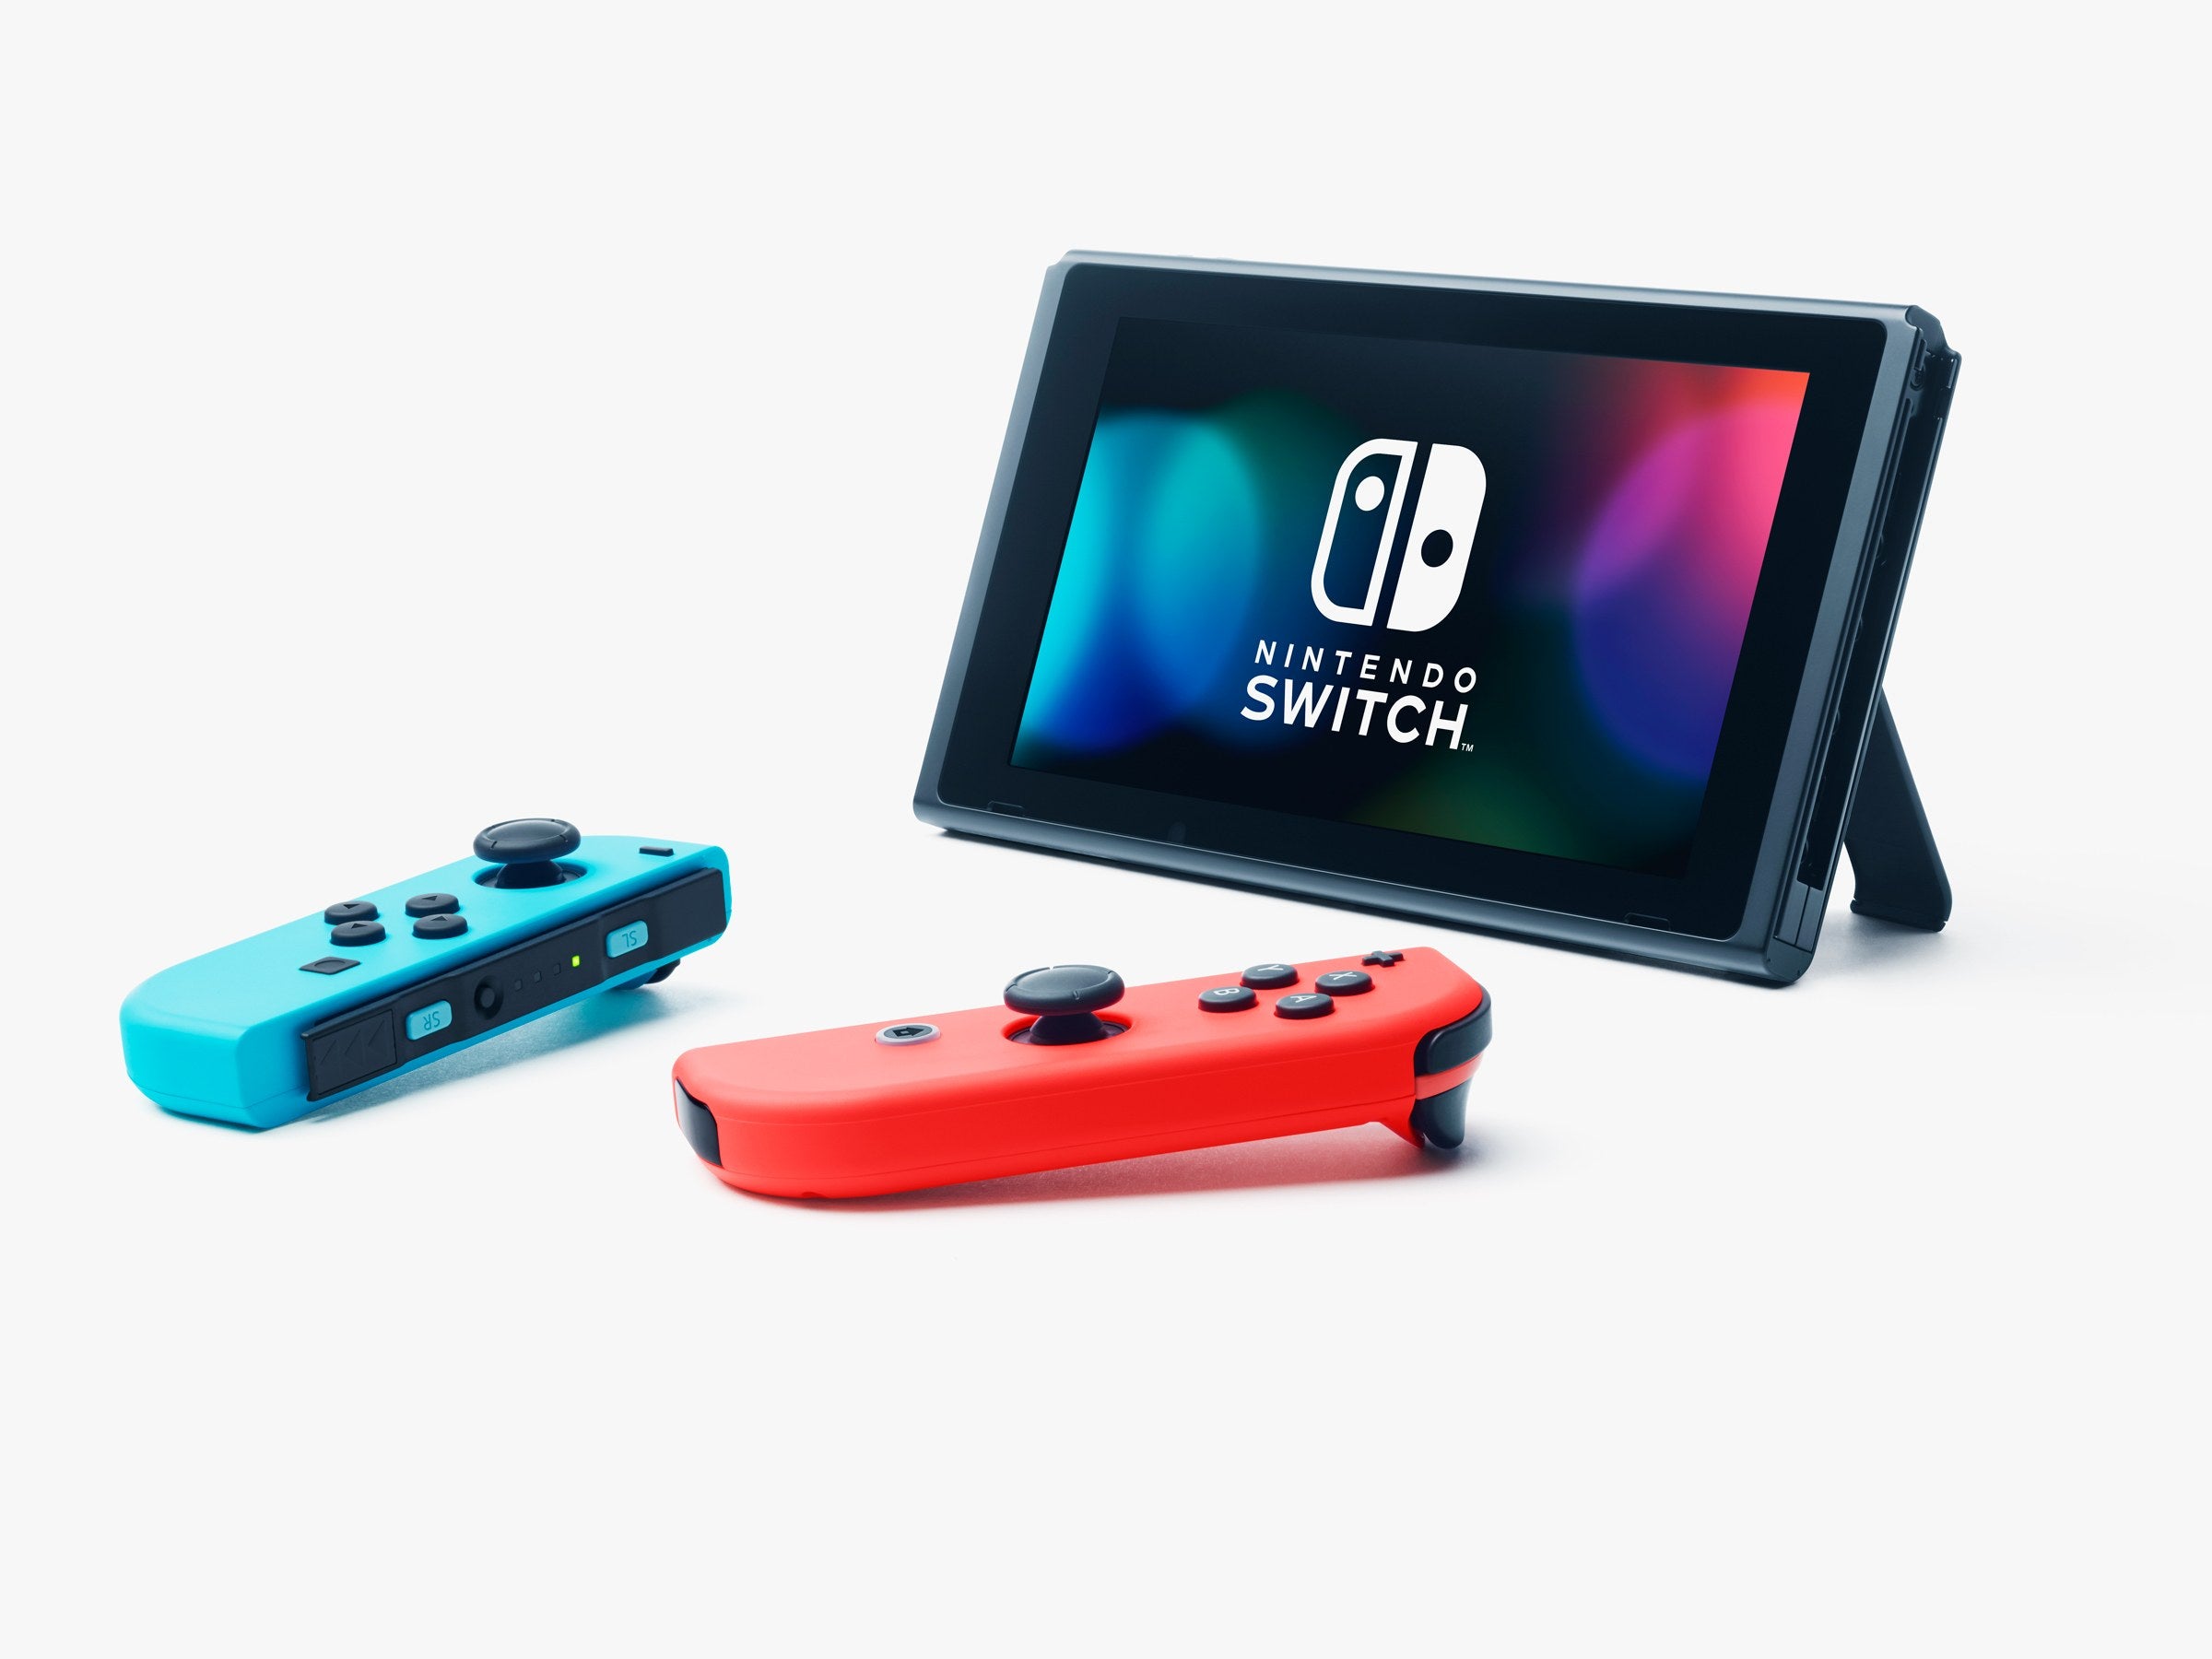 Image for Rumored Switch Pro Possibly Delayed According to New Report, Switch Lite Reportedly Dockable [Update, Correction]